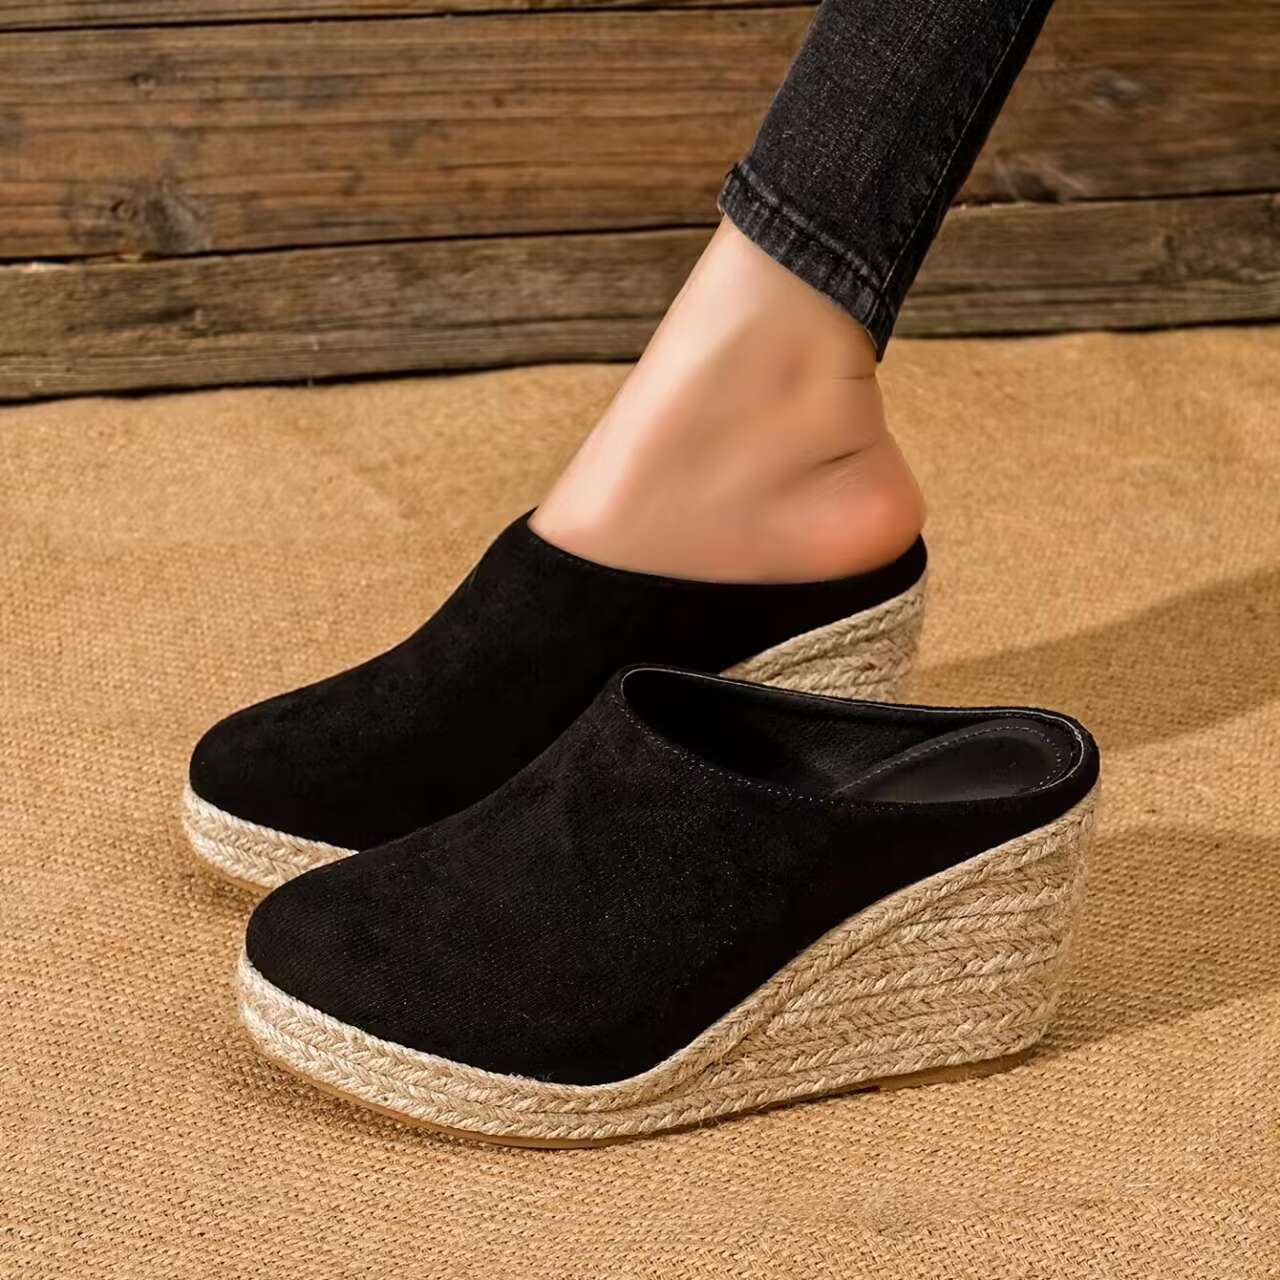 Pointed Toe Wedge Thick Bottom Toe Cap Women's Slippers